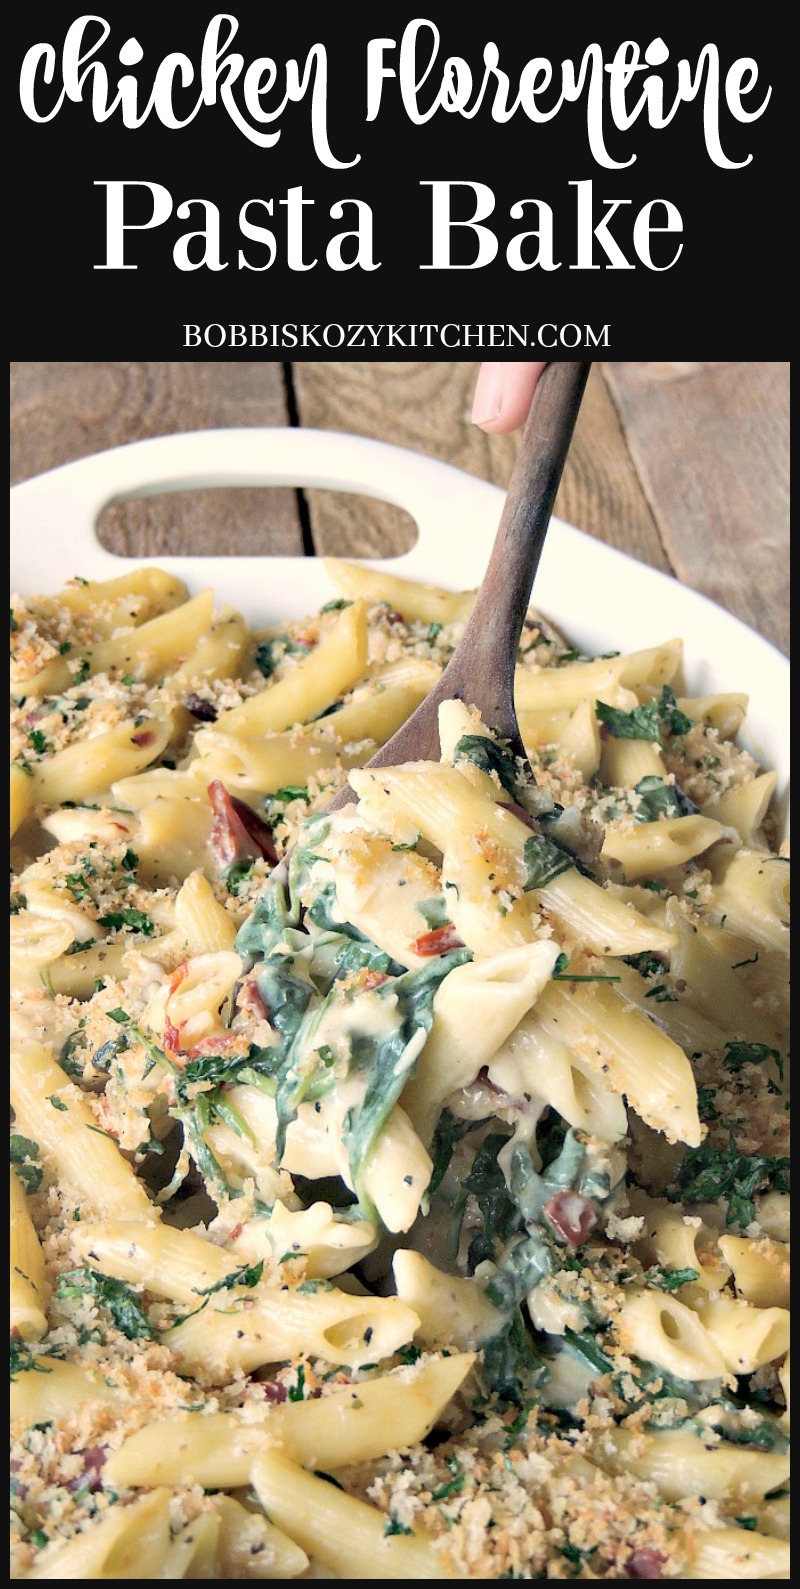 This hearty Chicken Florentine Pasta Bake takes your favorite comfort food to the next level and is done in 30 minutes from www.bobbiskozykitchen.com